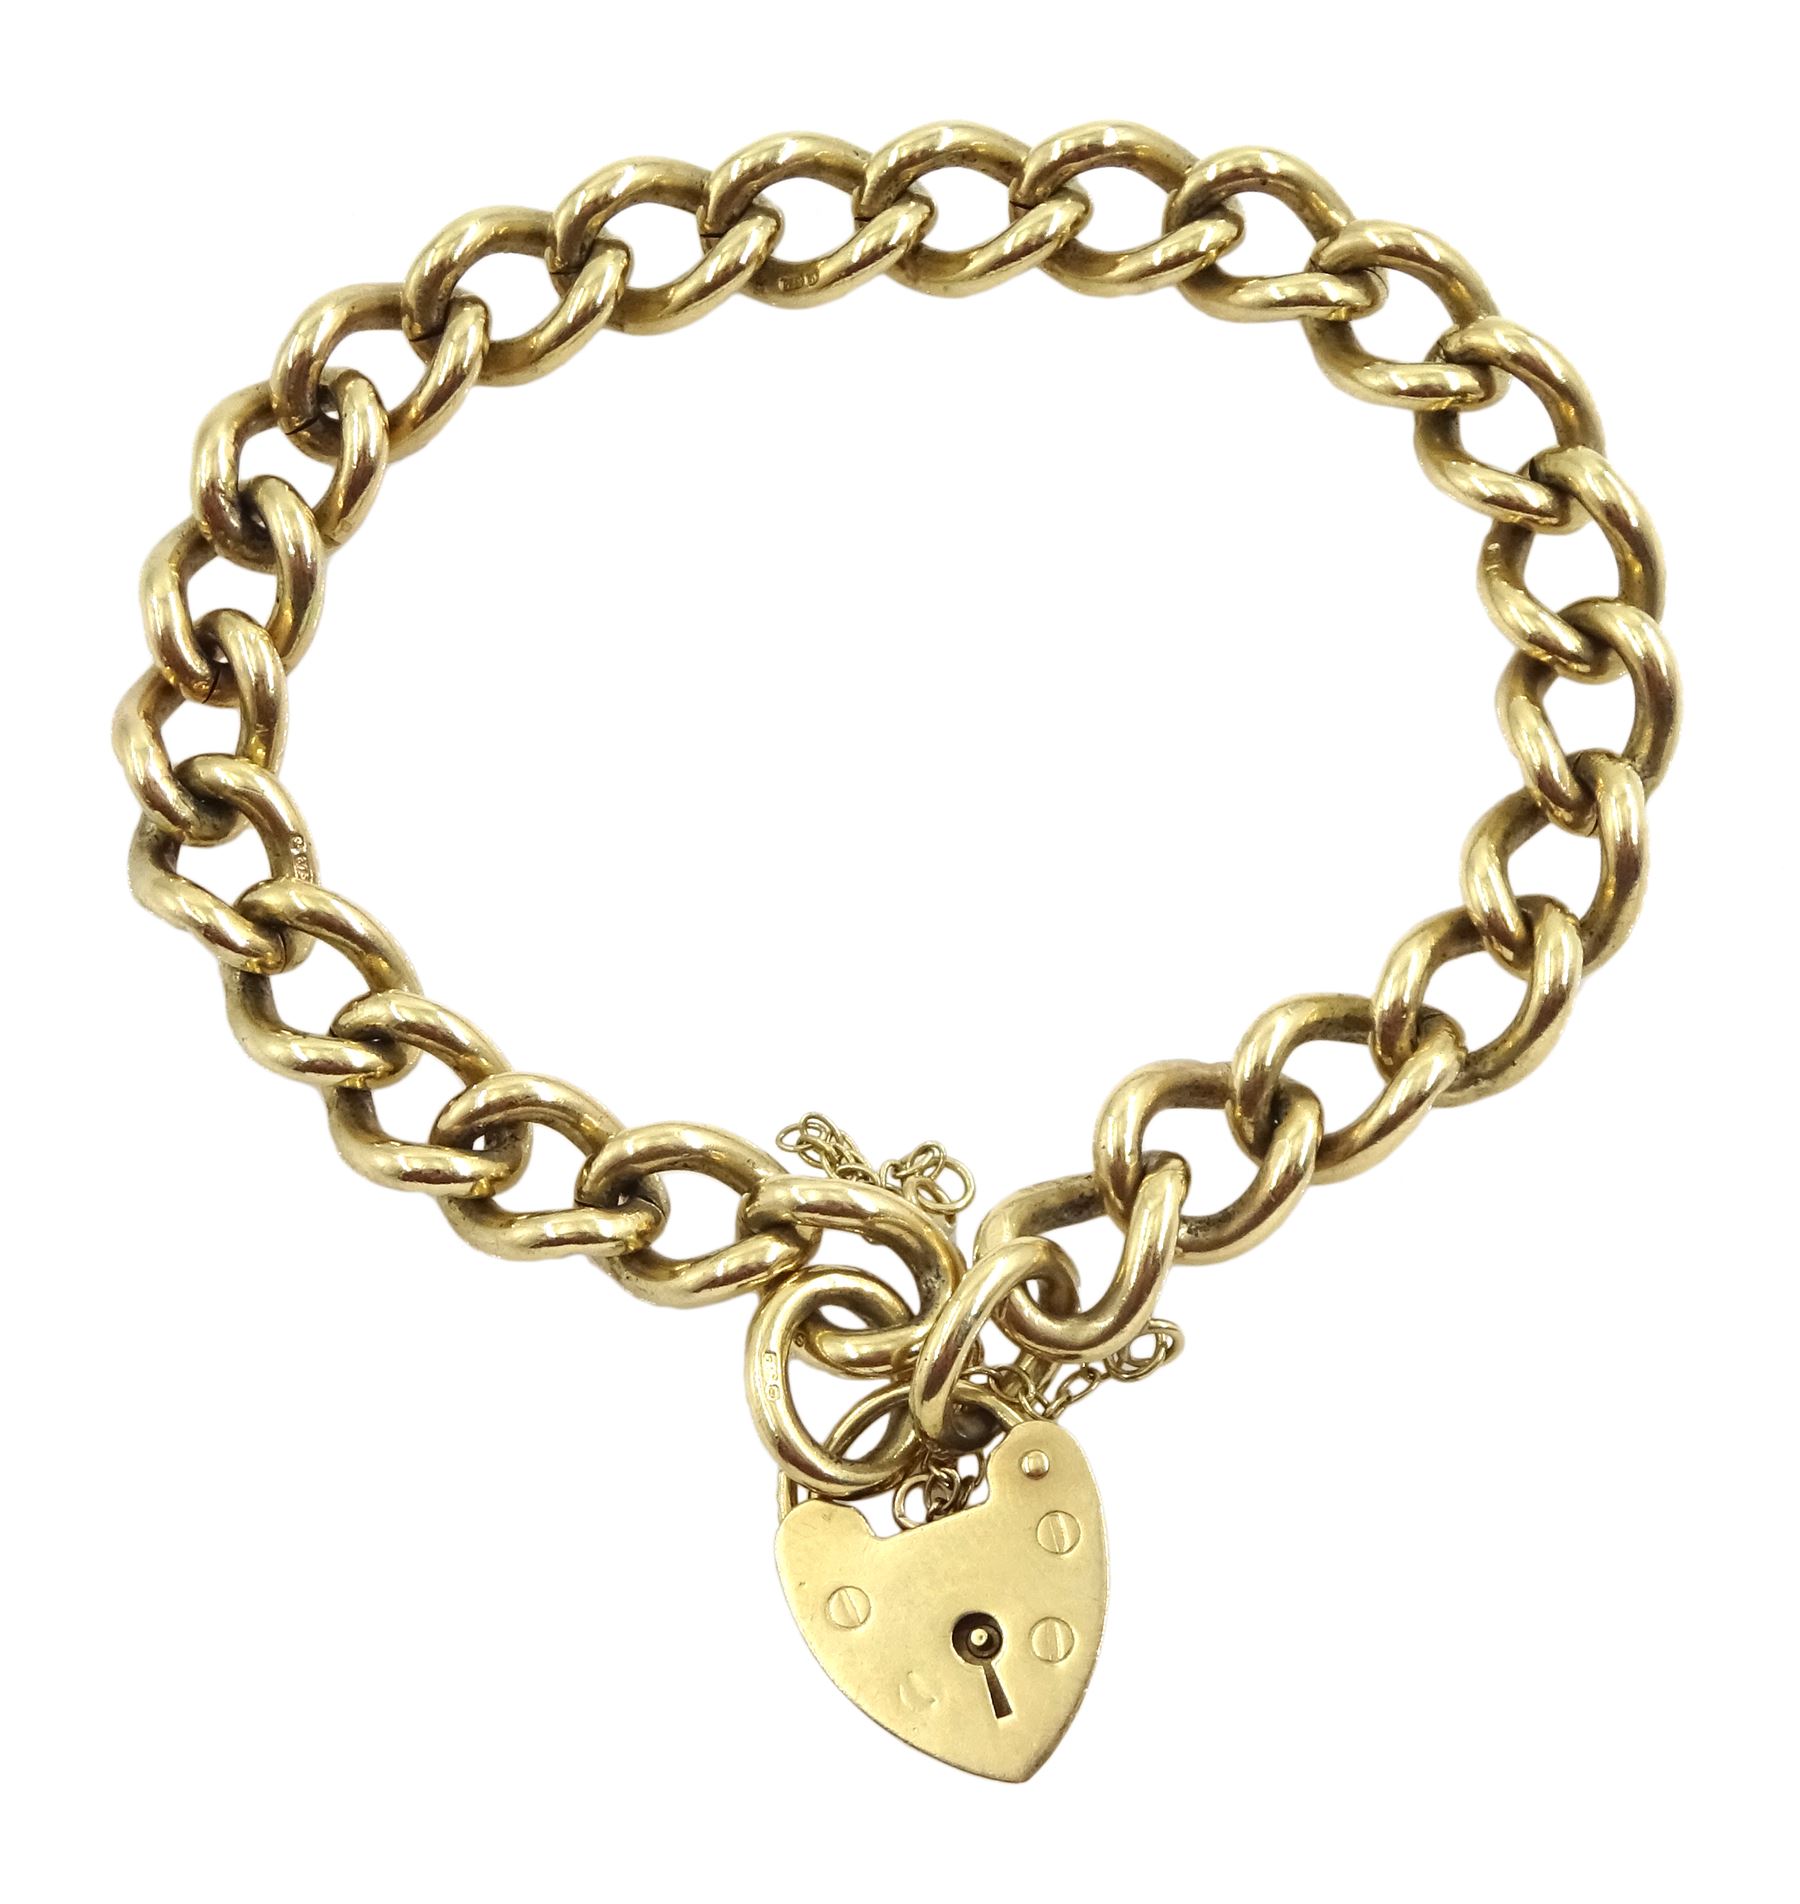 9ct gold curb chain bracelet, stamped 9.375, approx 33gm - Jewellery ...